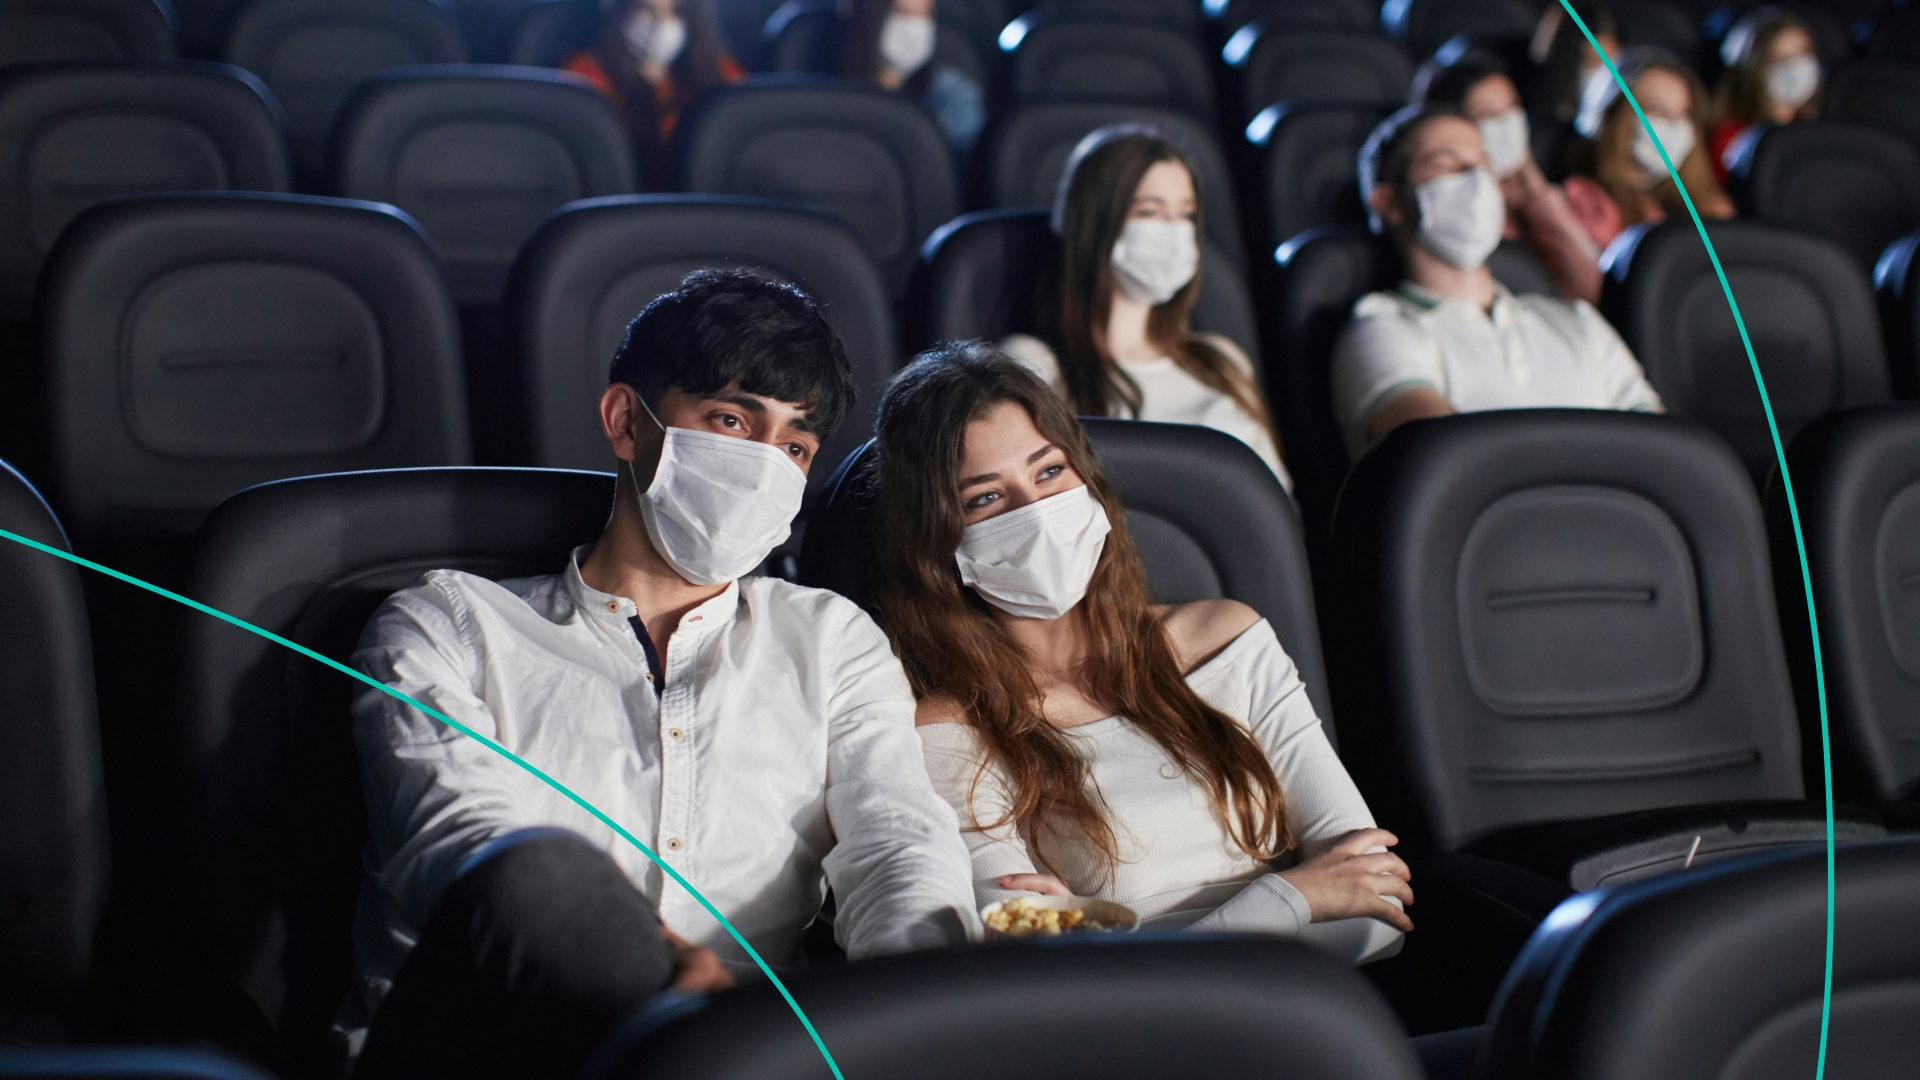 Couple sitting together in the movie theater